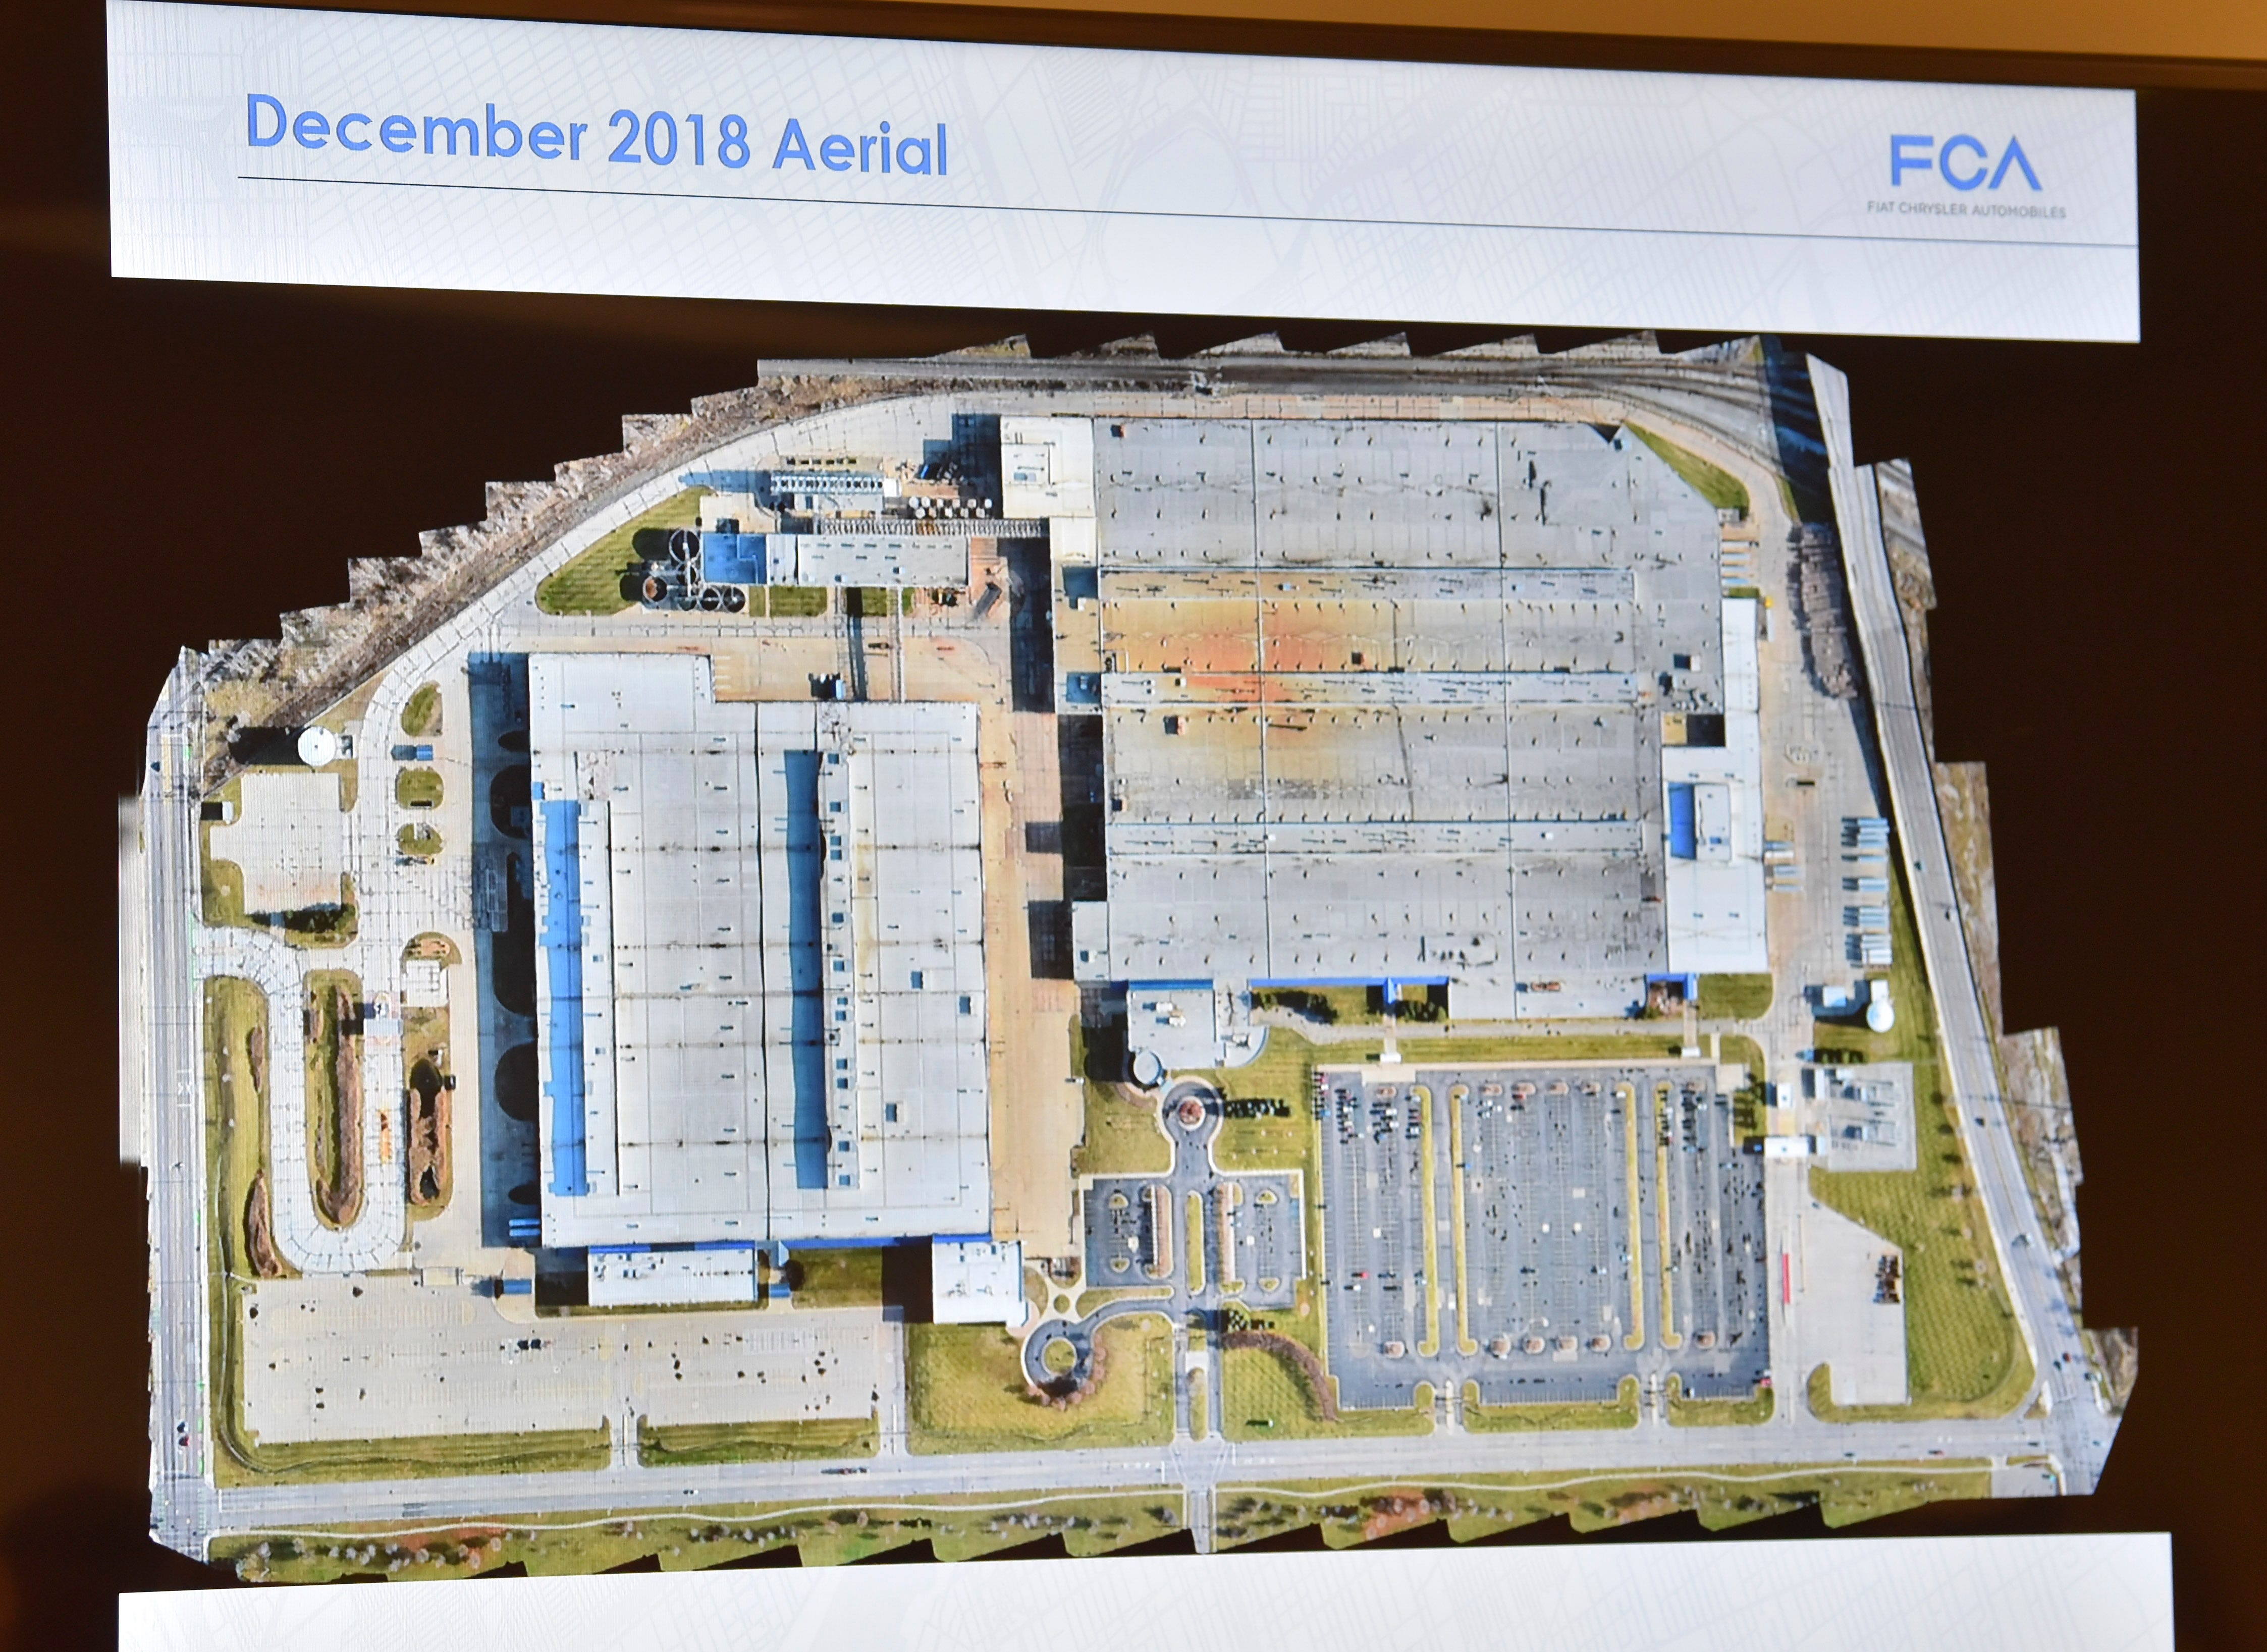 This is a December 2018 aerial view.